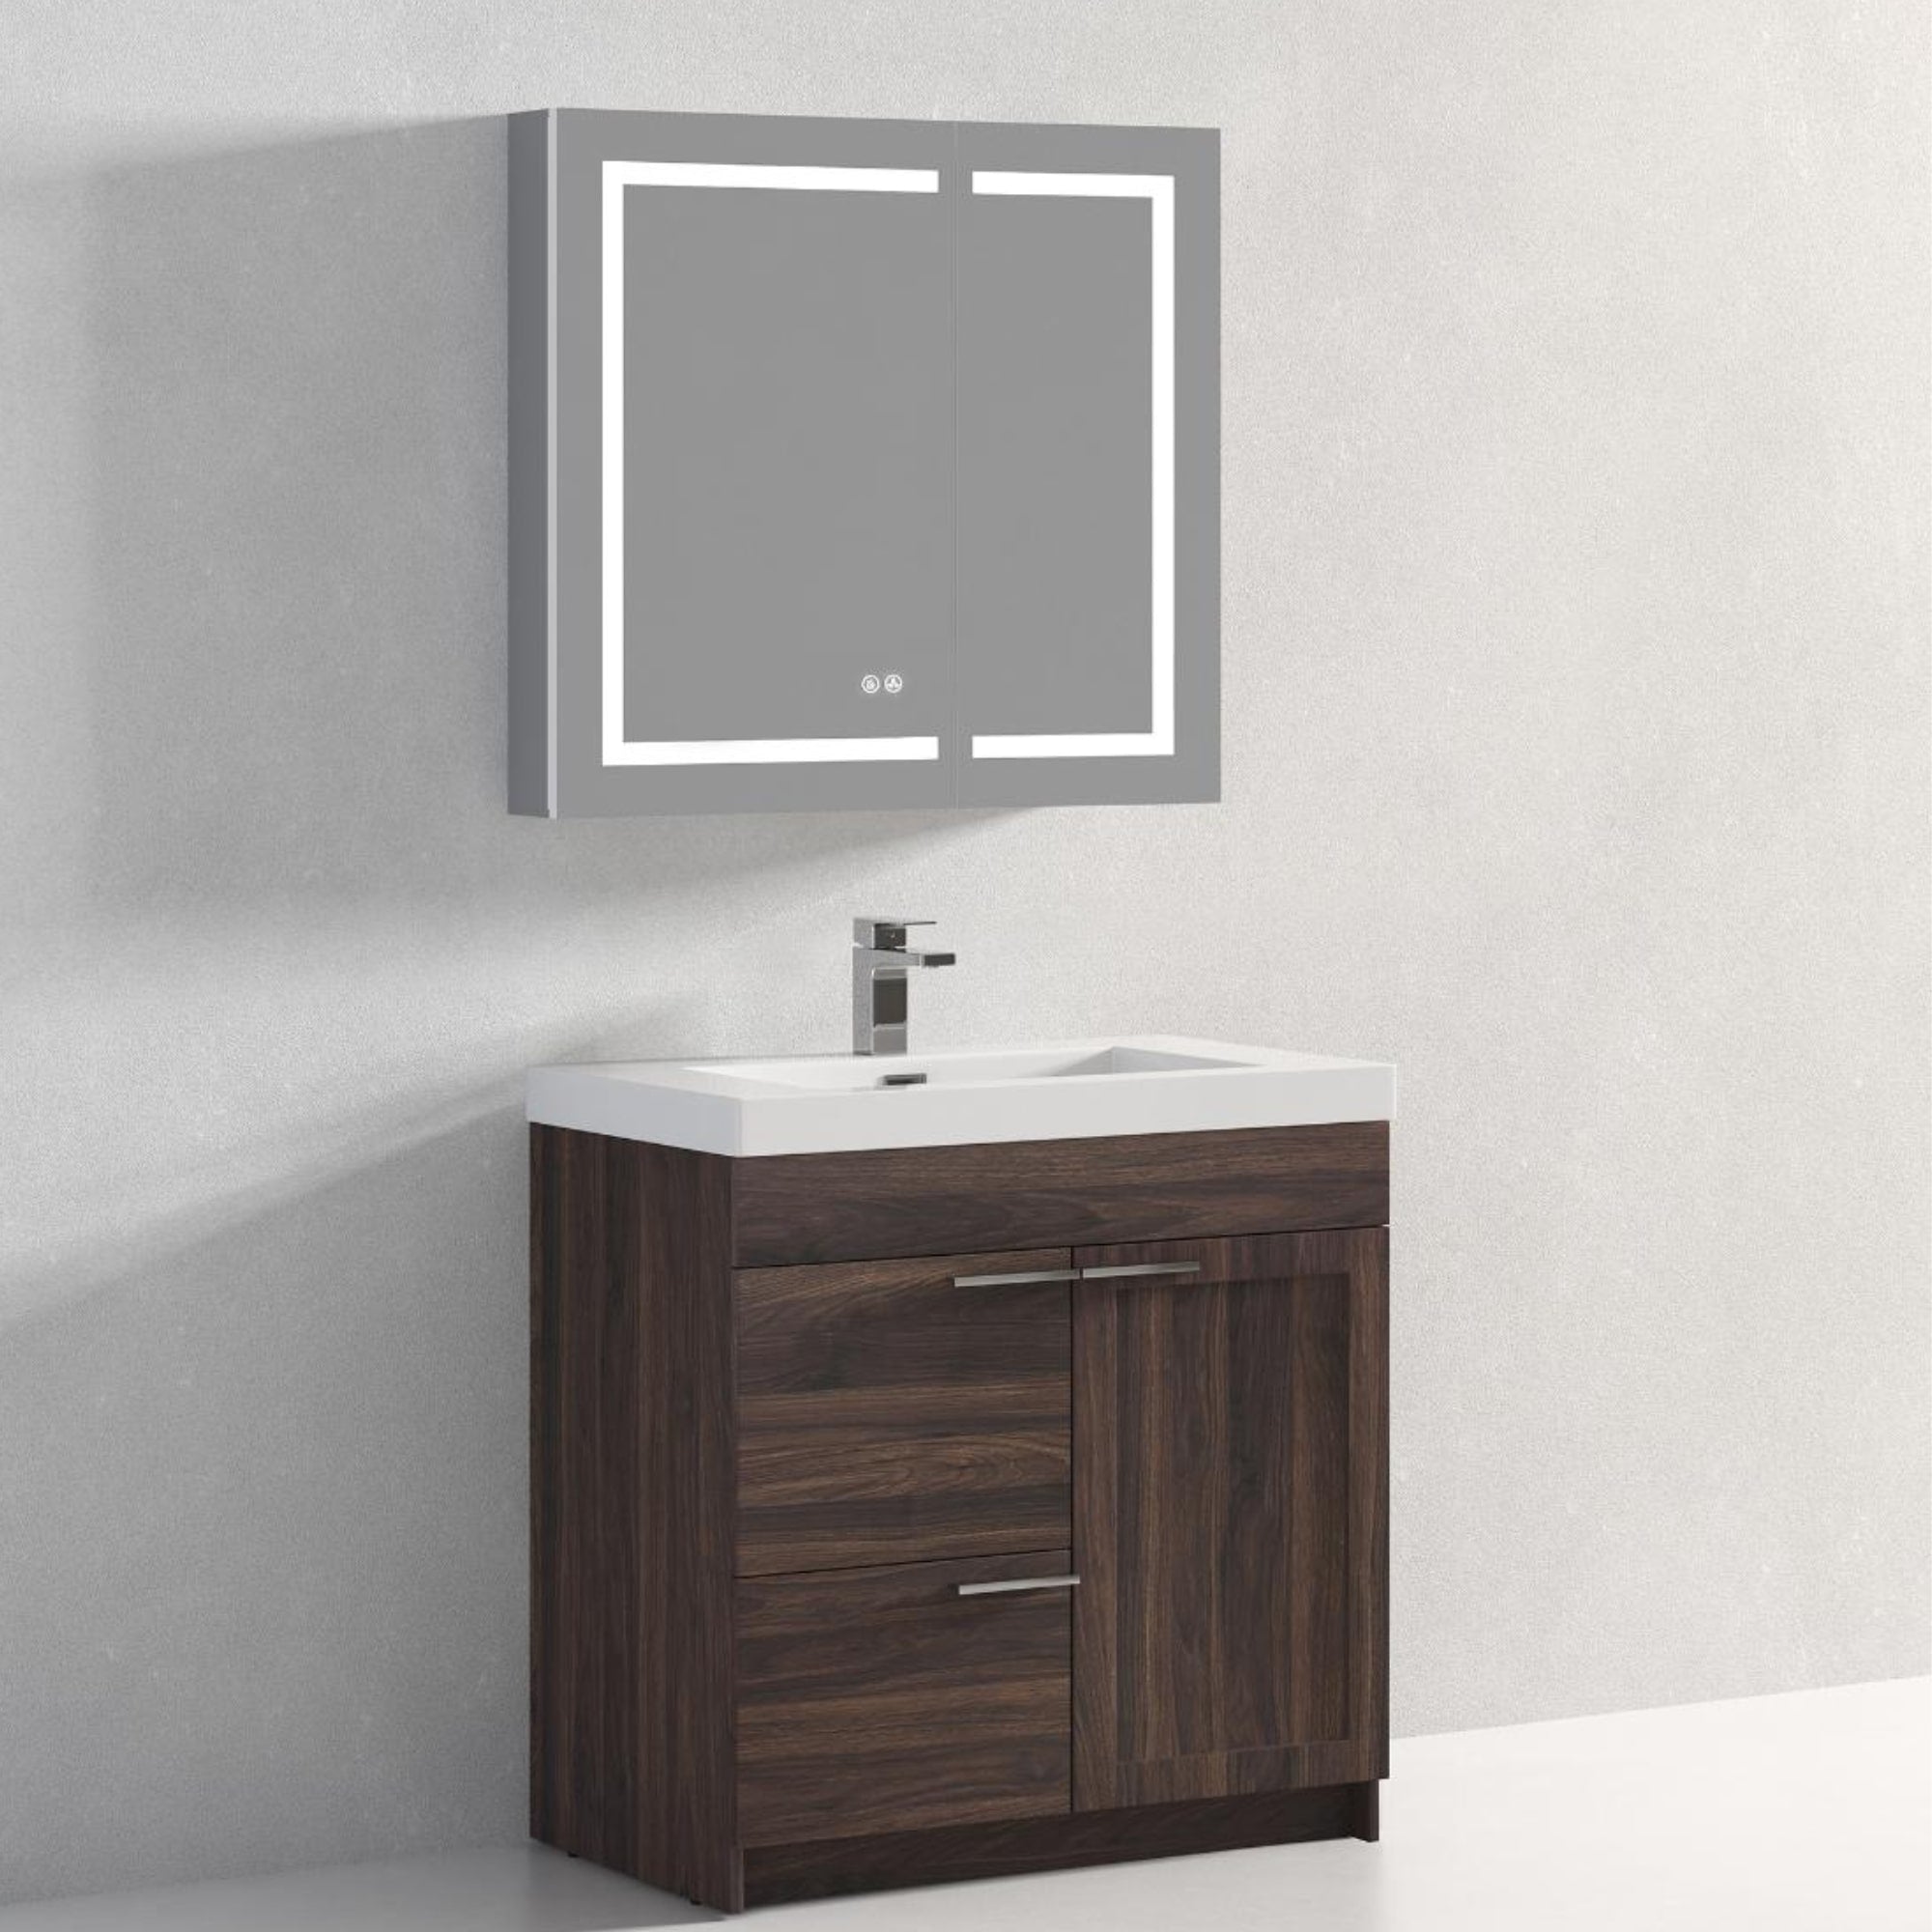 The Hanover is a cross between modern and contemporary bathroom vanity.